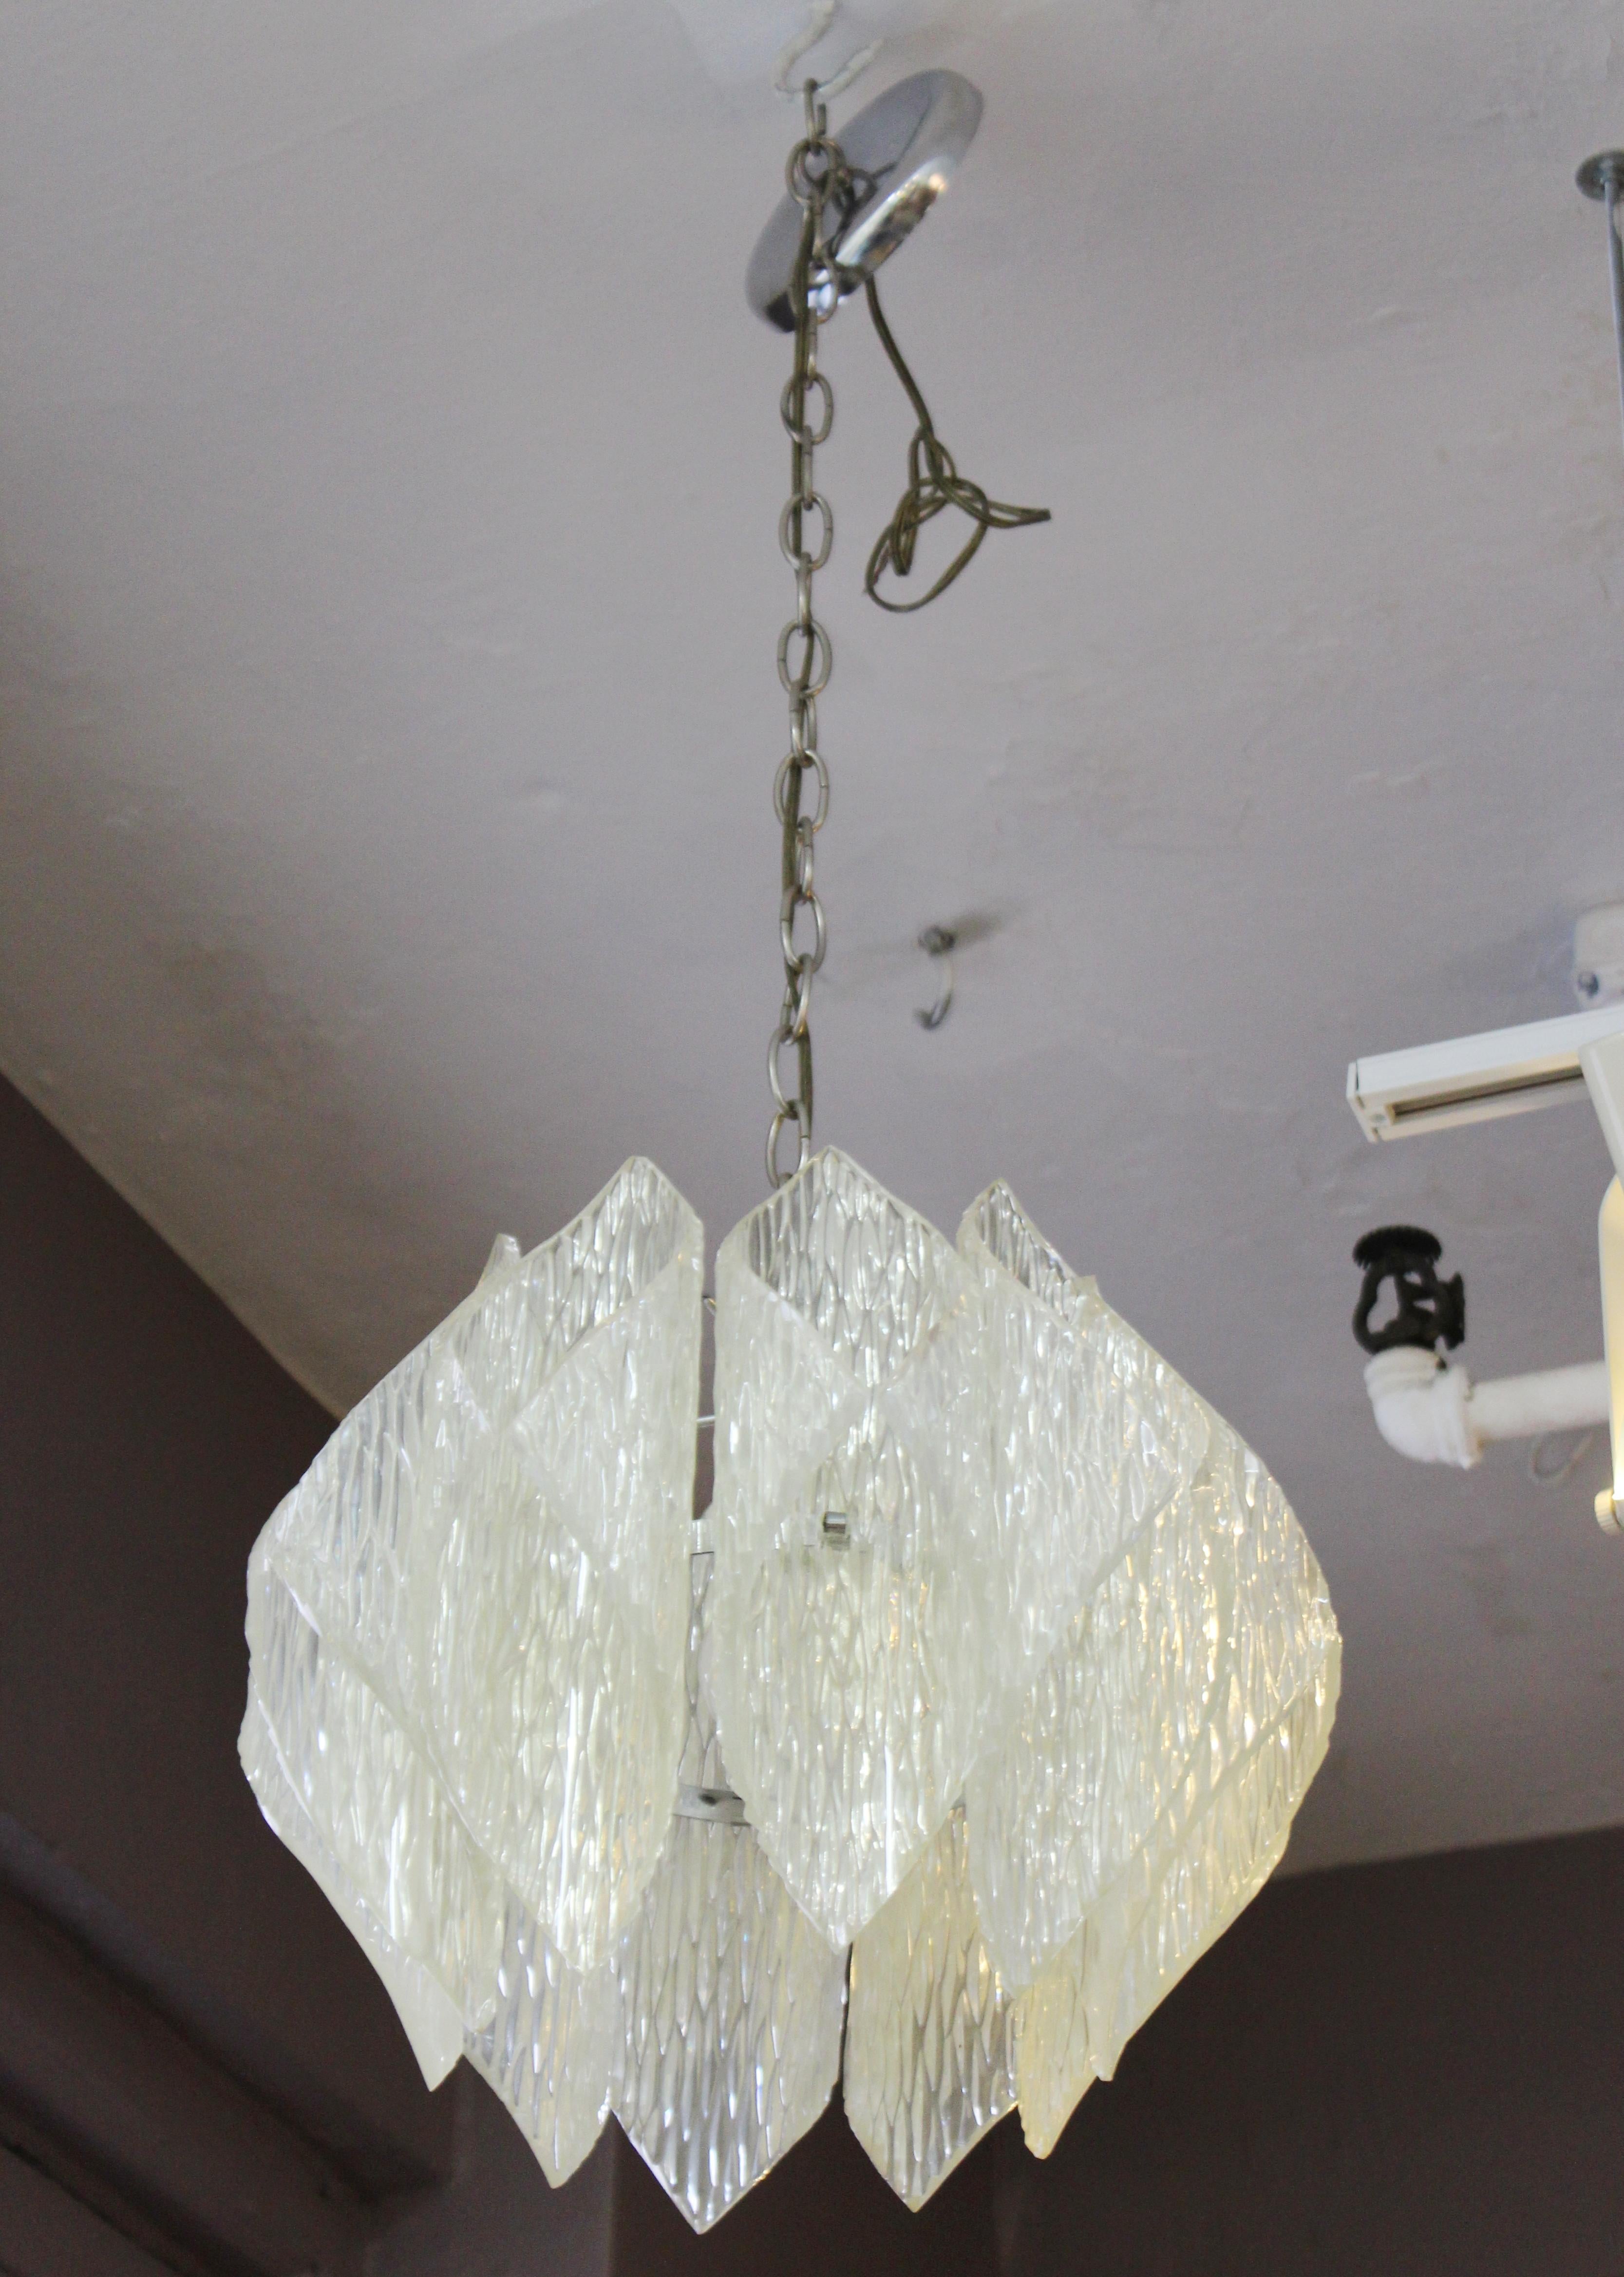 Mid-Century Modern Kalmar style chandelier pendant with a metal frame with a shade made of folded acrylic elements. The piece is in good vintage condition with age appropriate wear and patina.